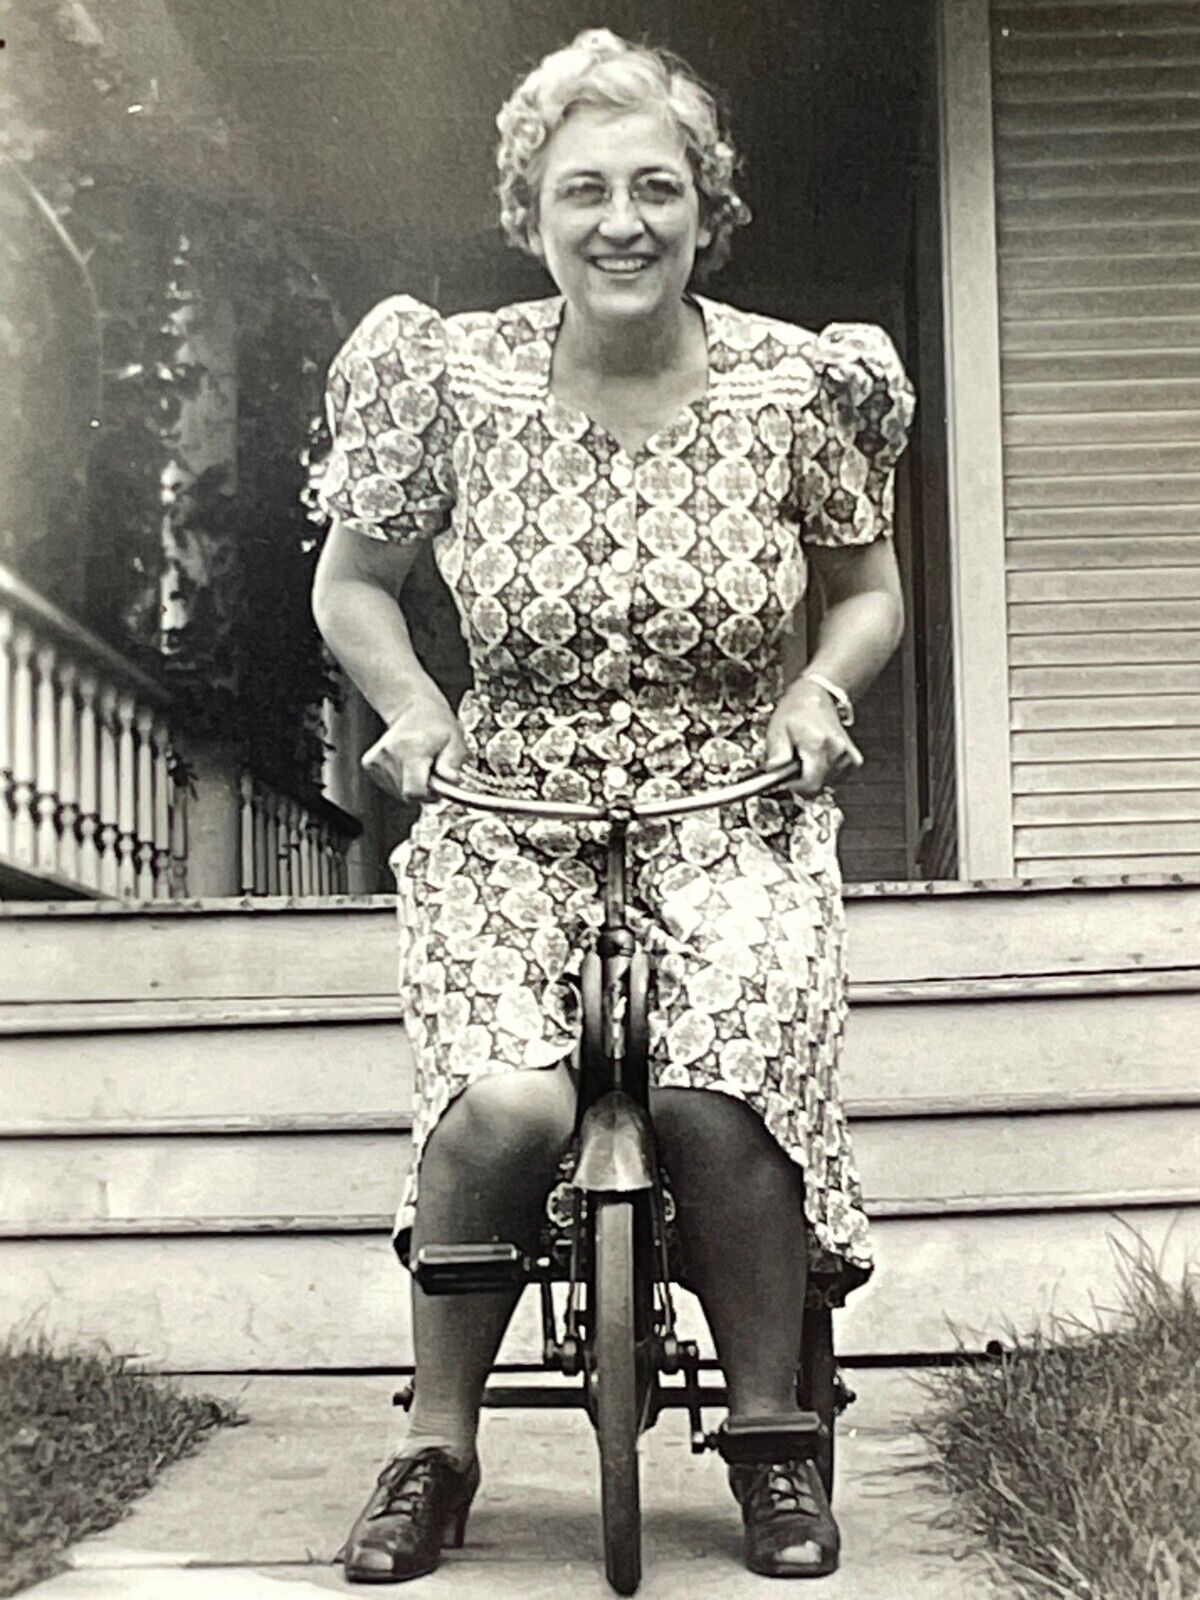 W3 Photograph Funny Old Lady Rides Riding Tricycle 1942 Silly Woman